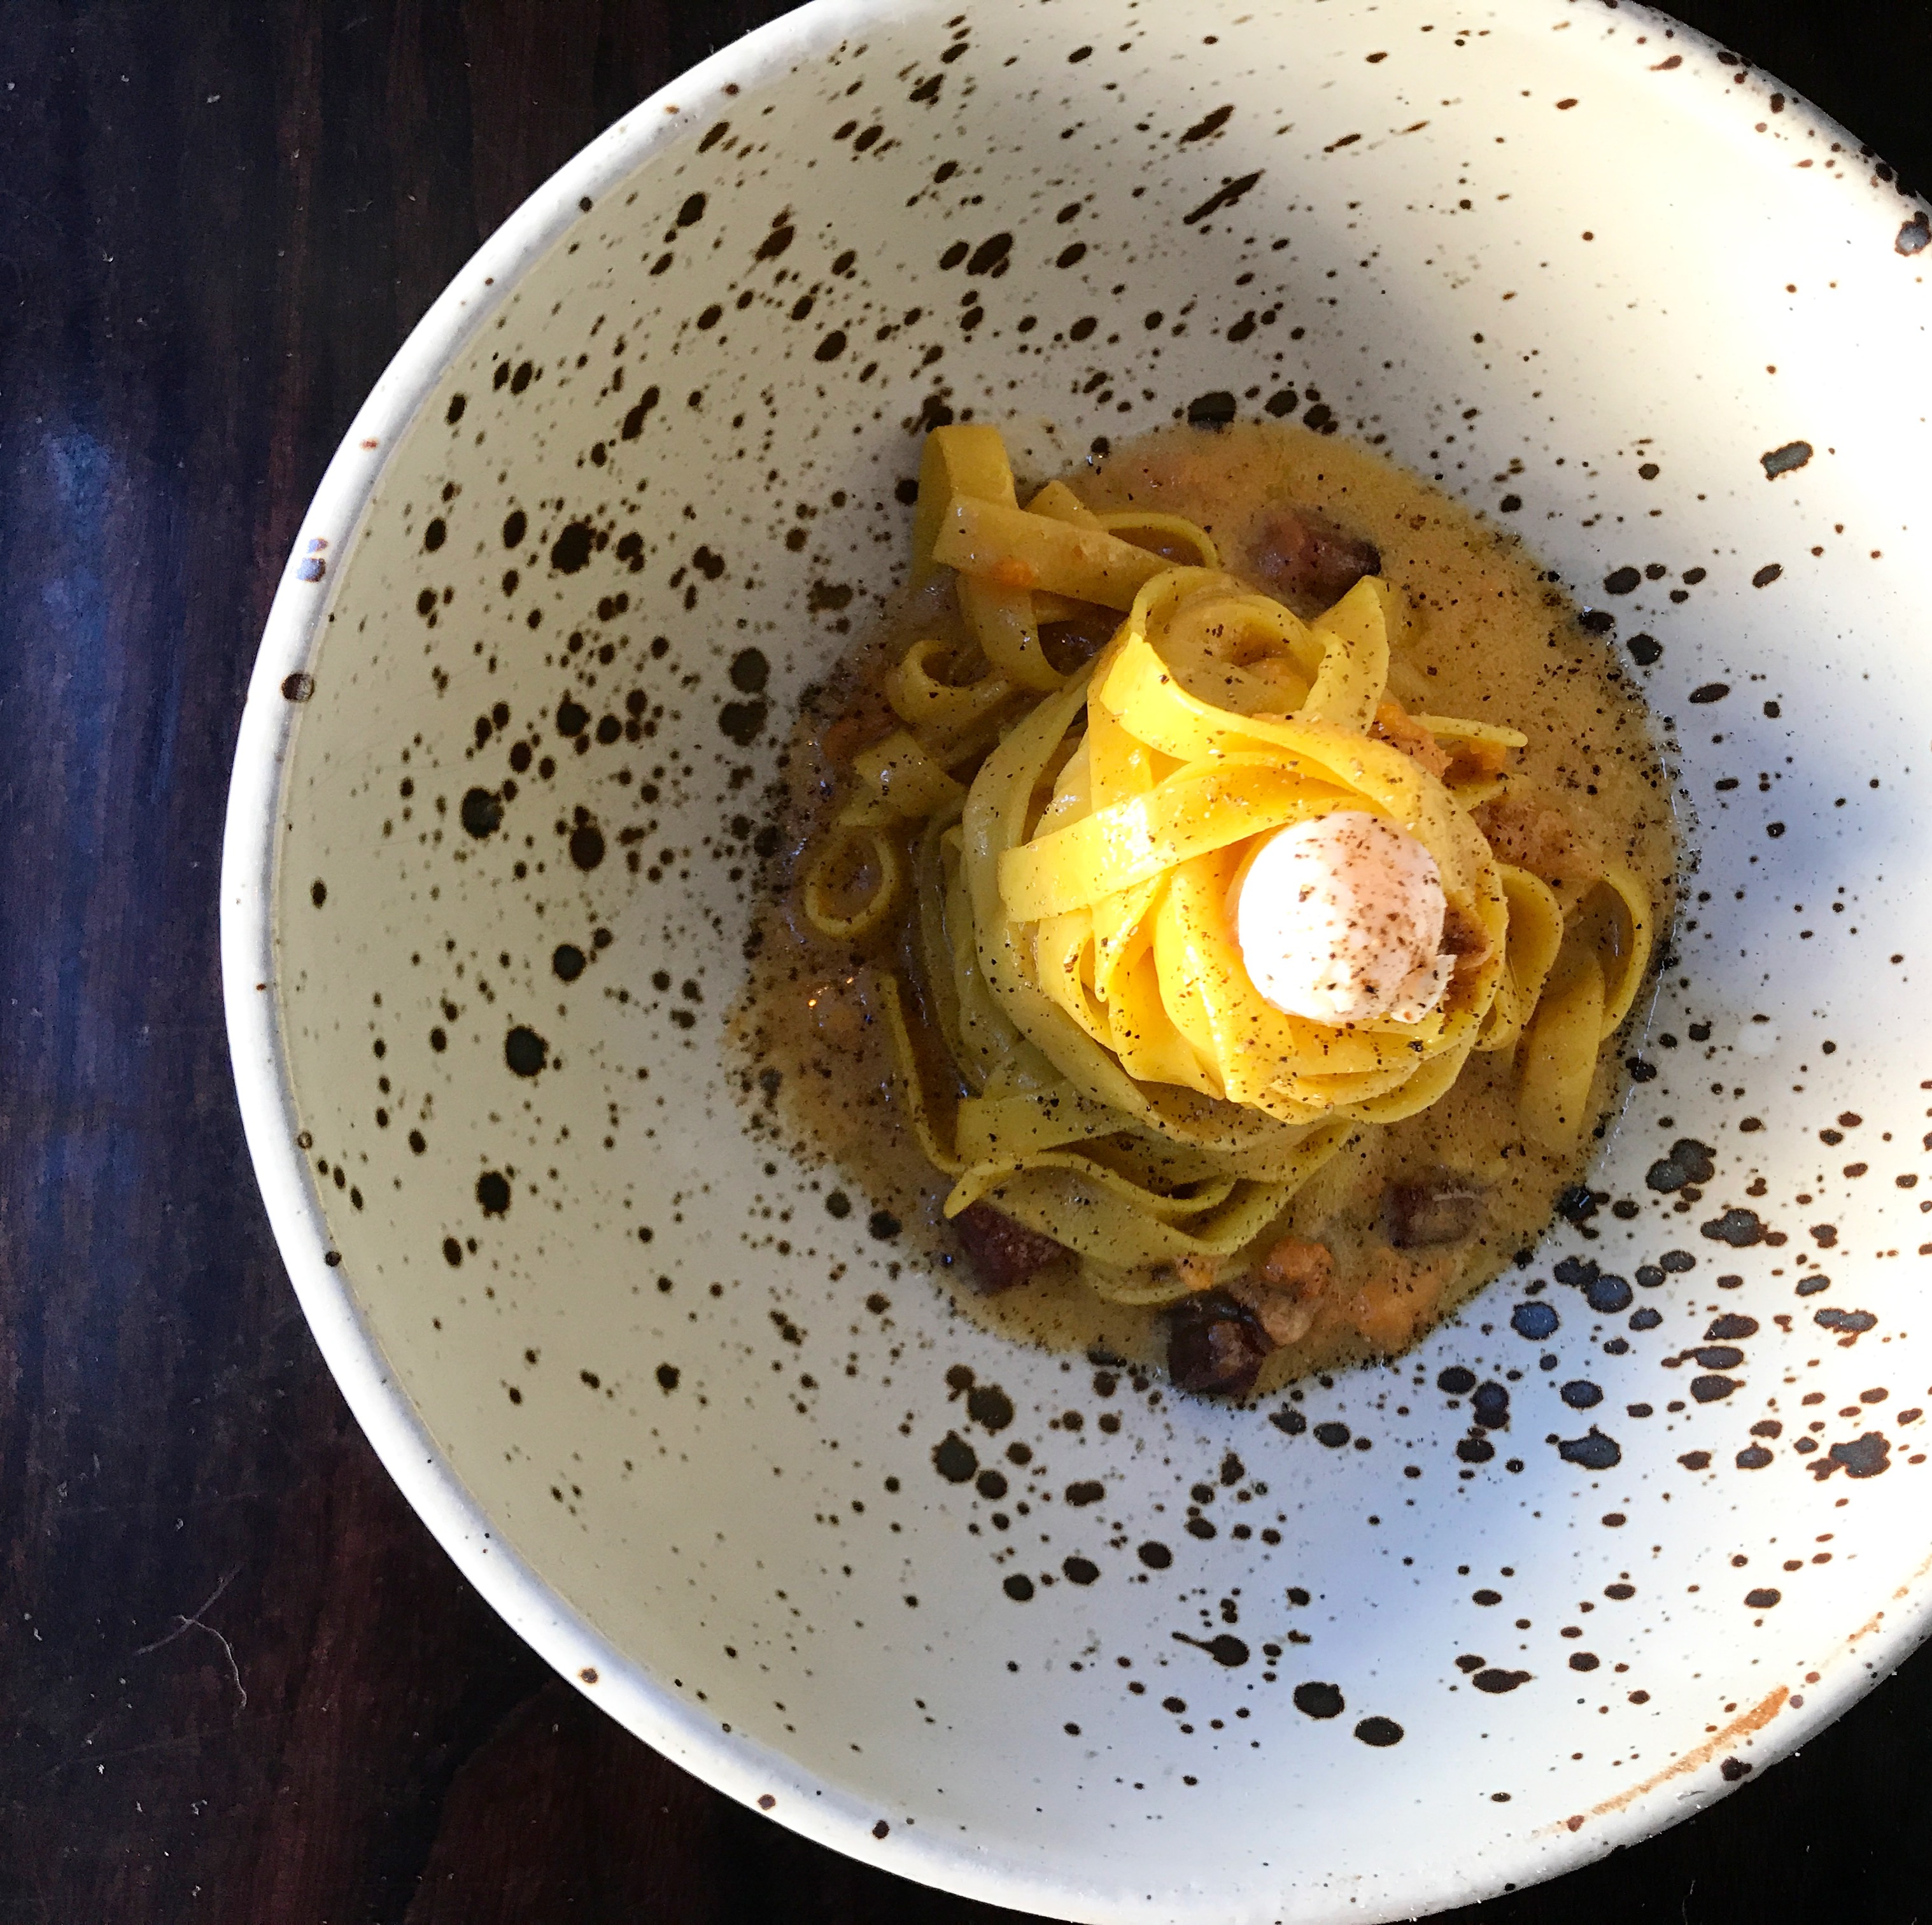 Smoked fettuccine with sea urchin and bacon.